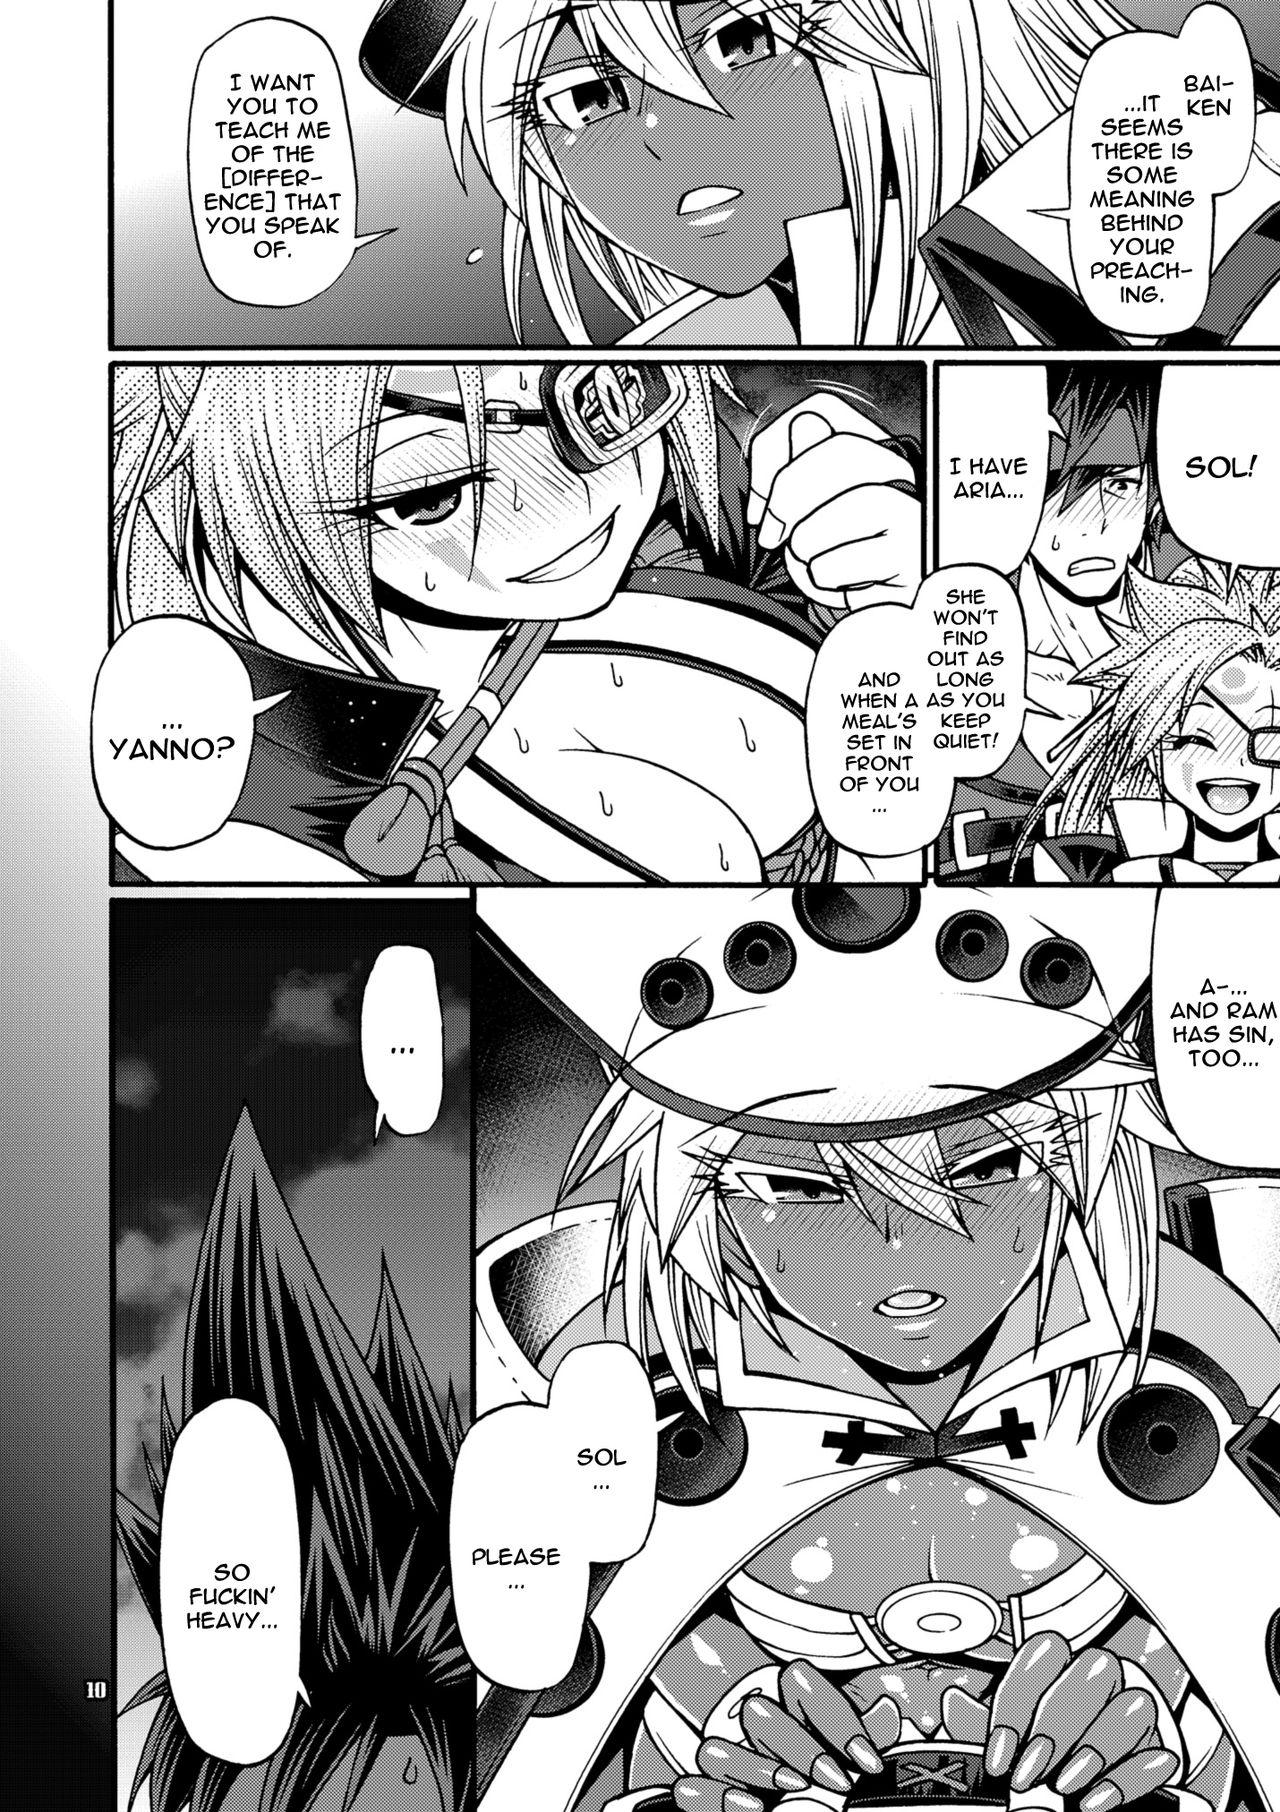 Chubby Do What You Wanna Do - Guilty gear Shaven - Page 9